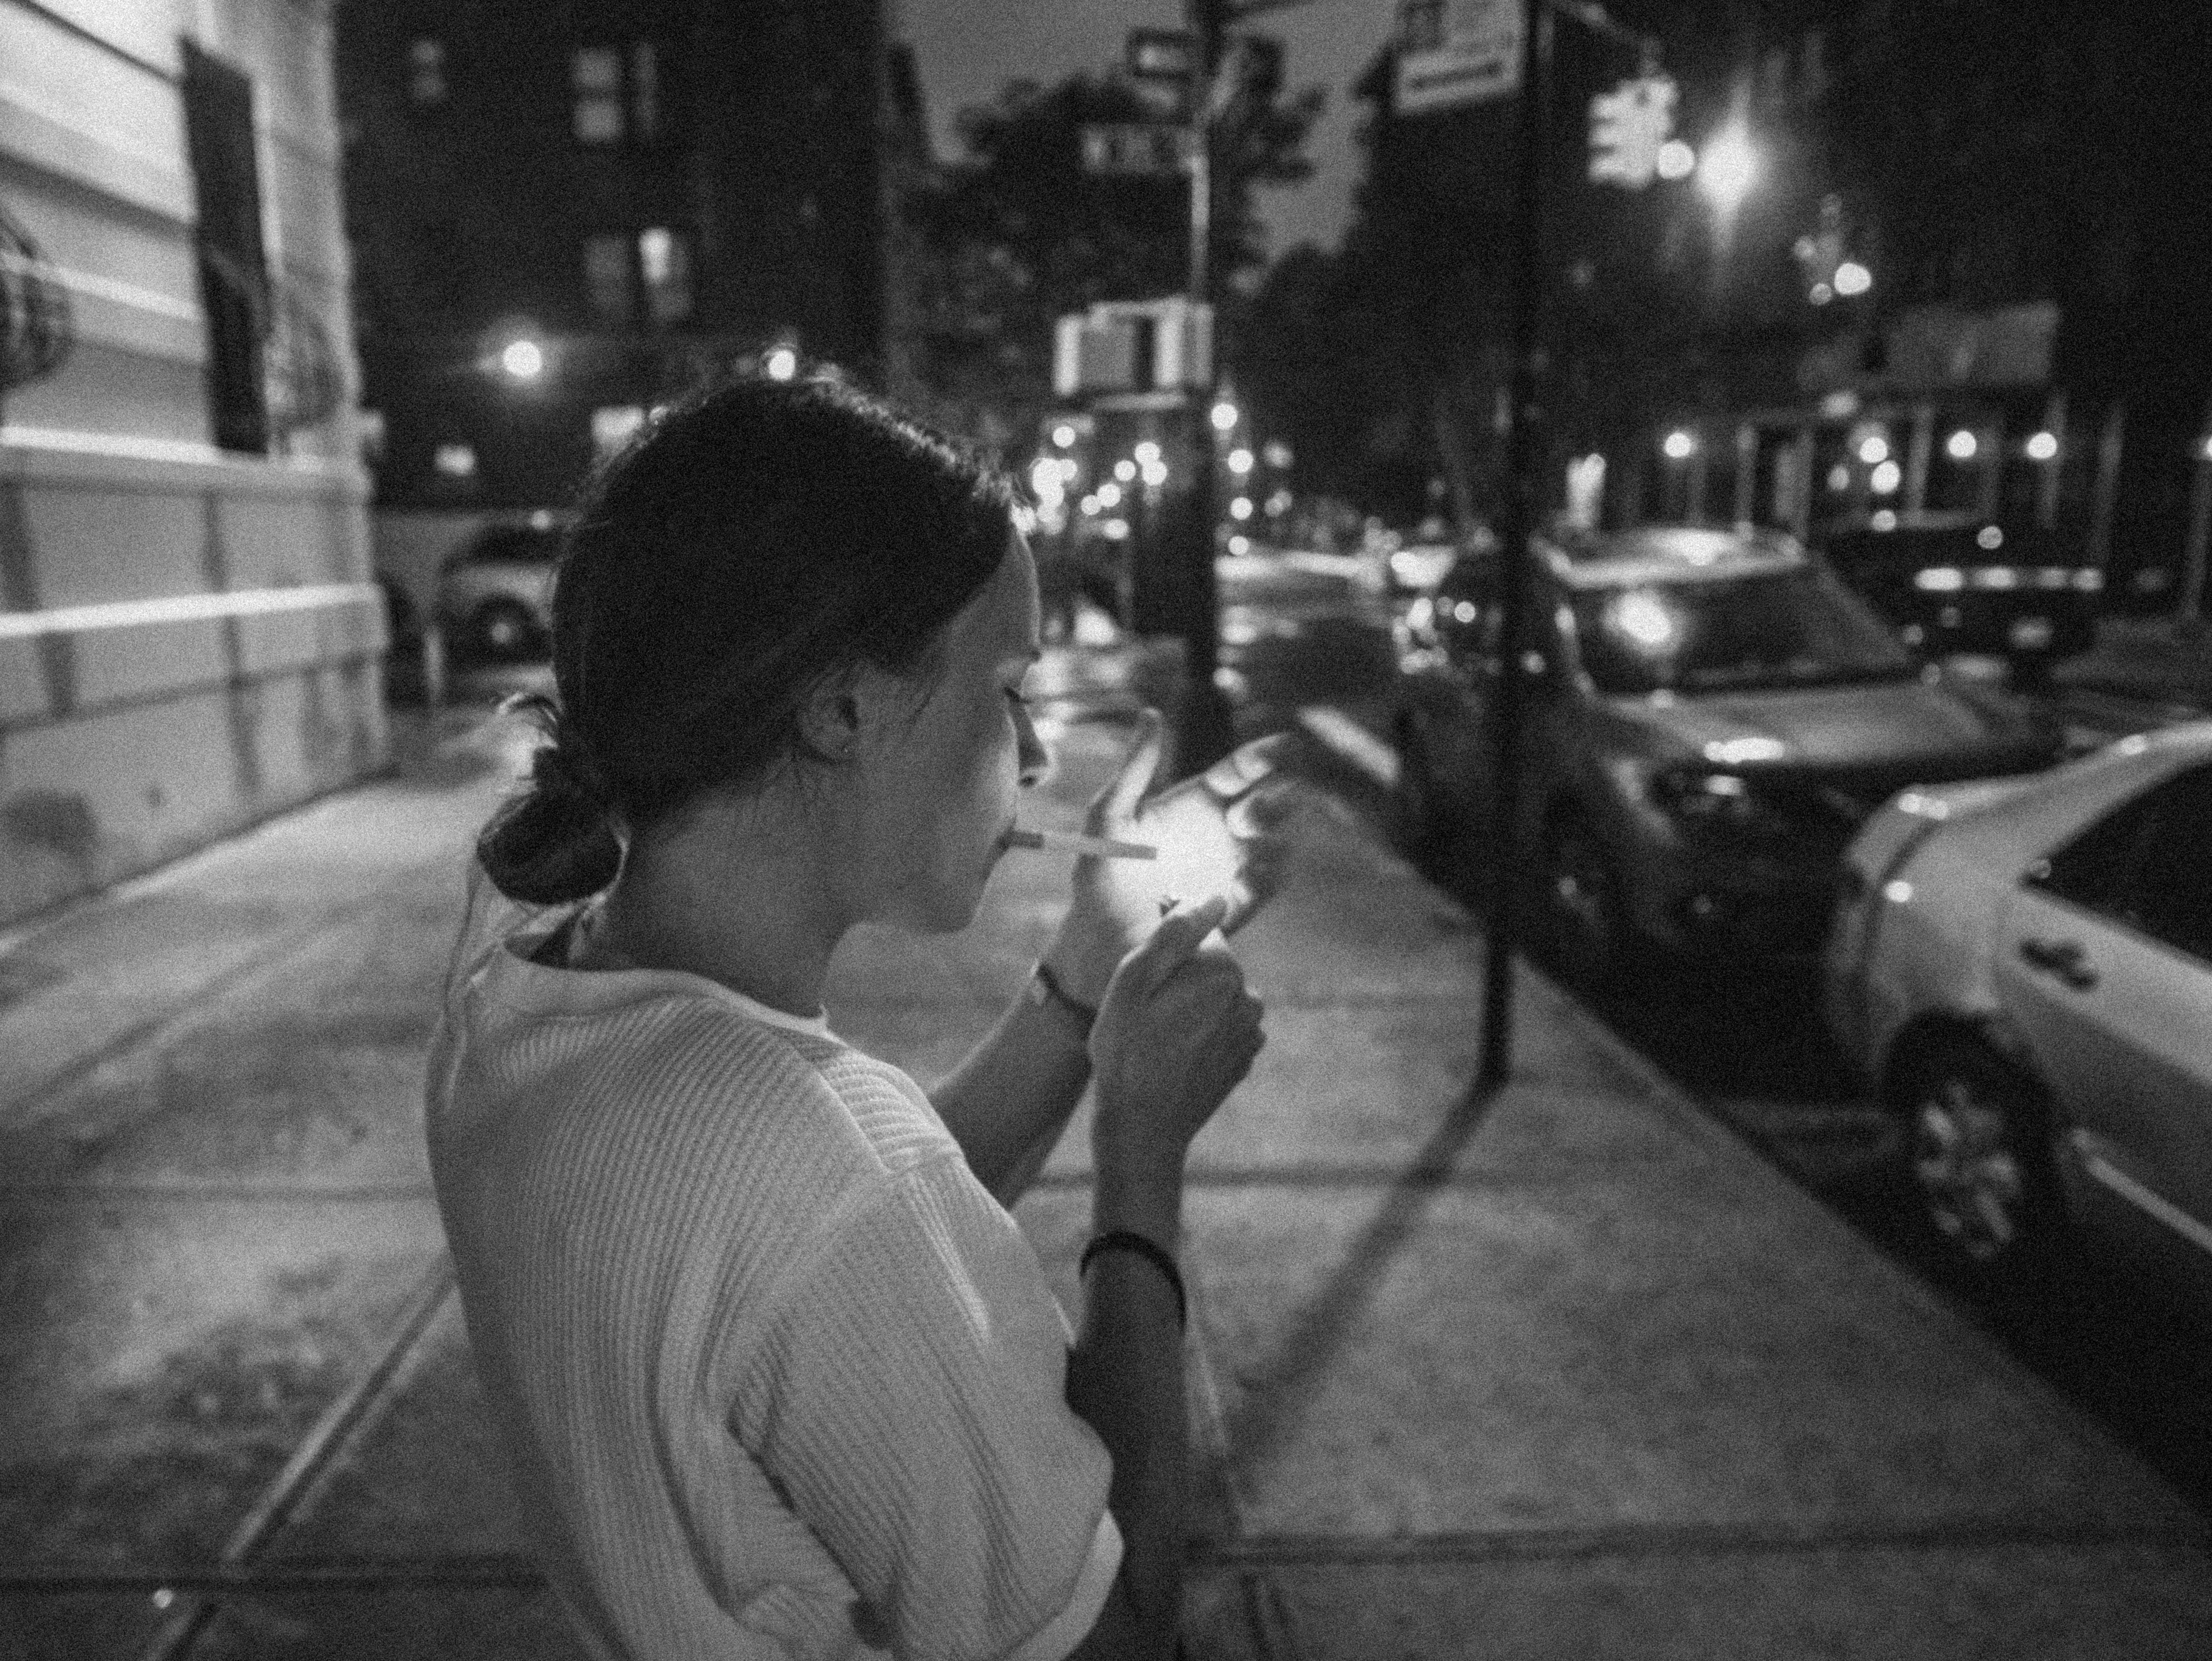 Smoking cigarettes in the city.